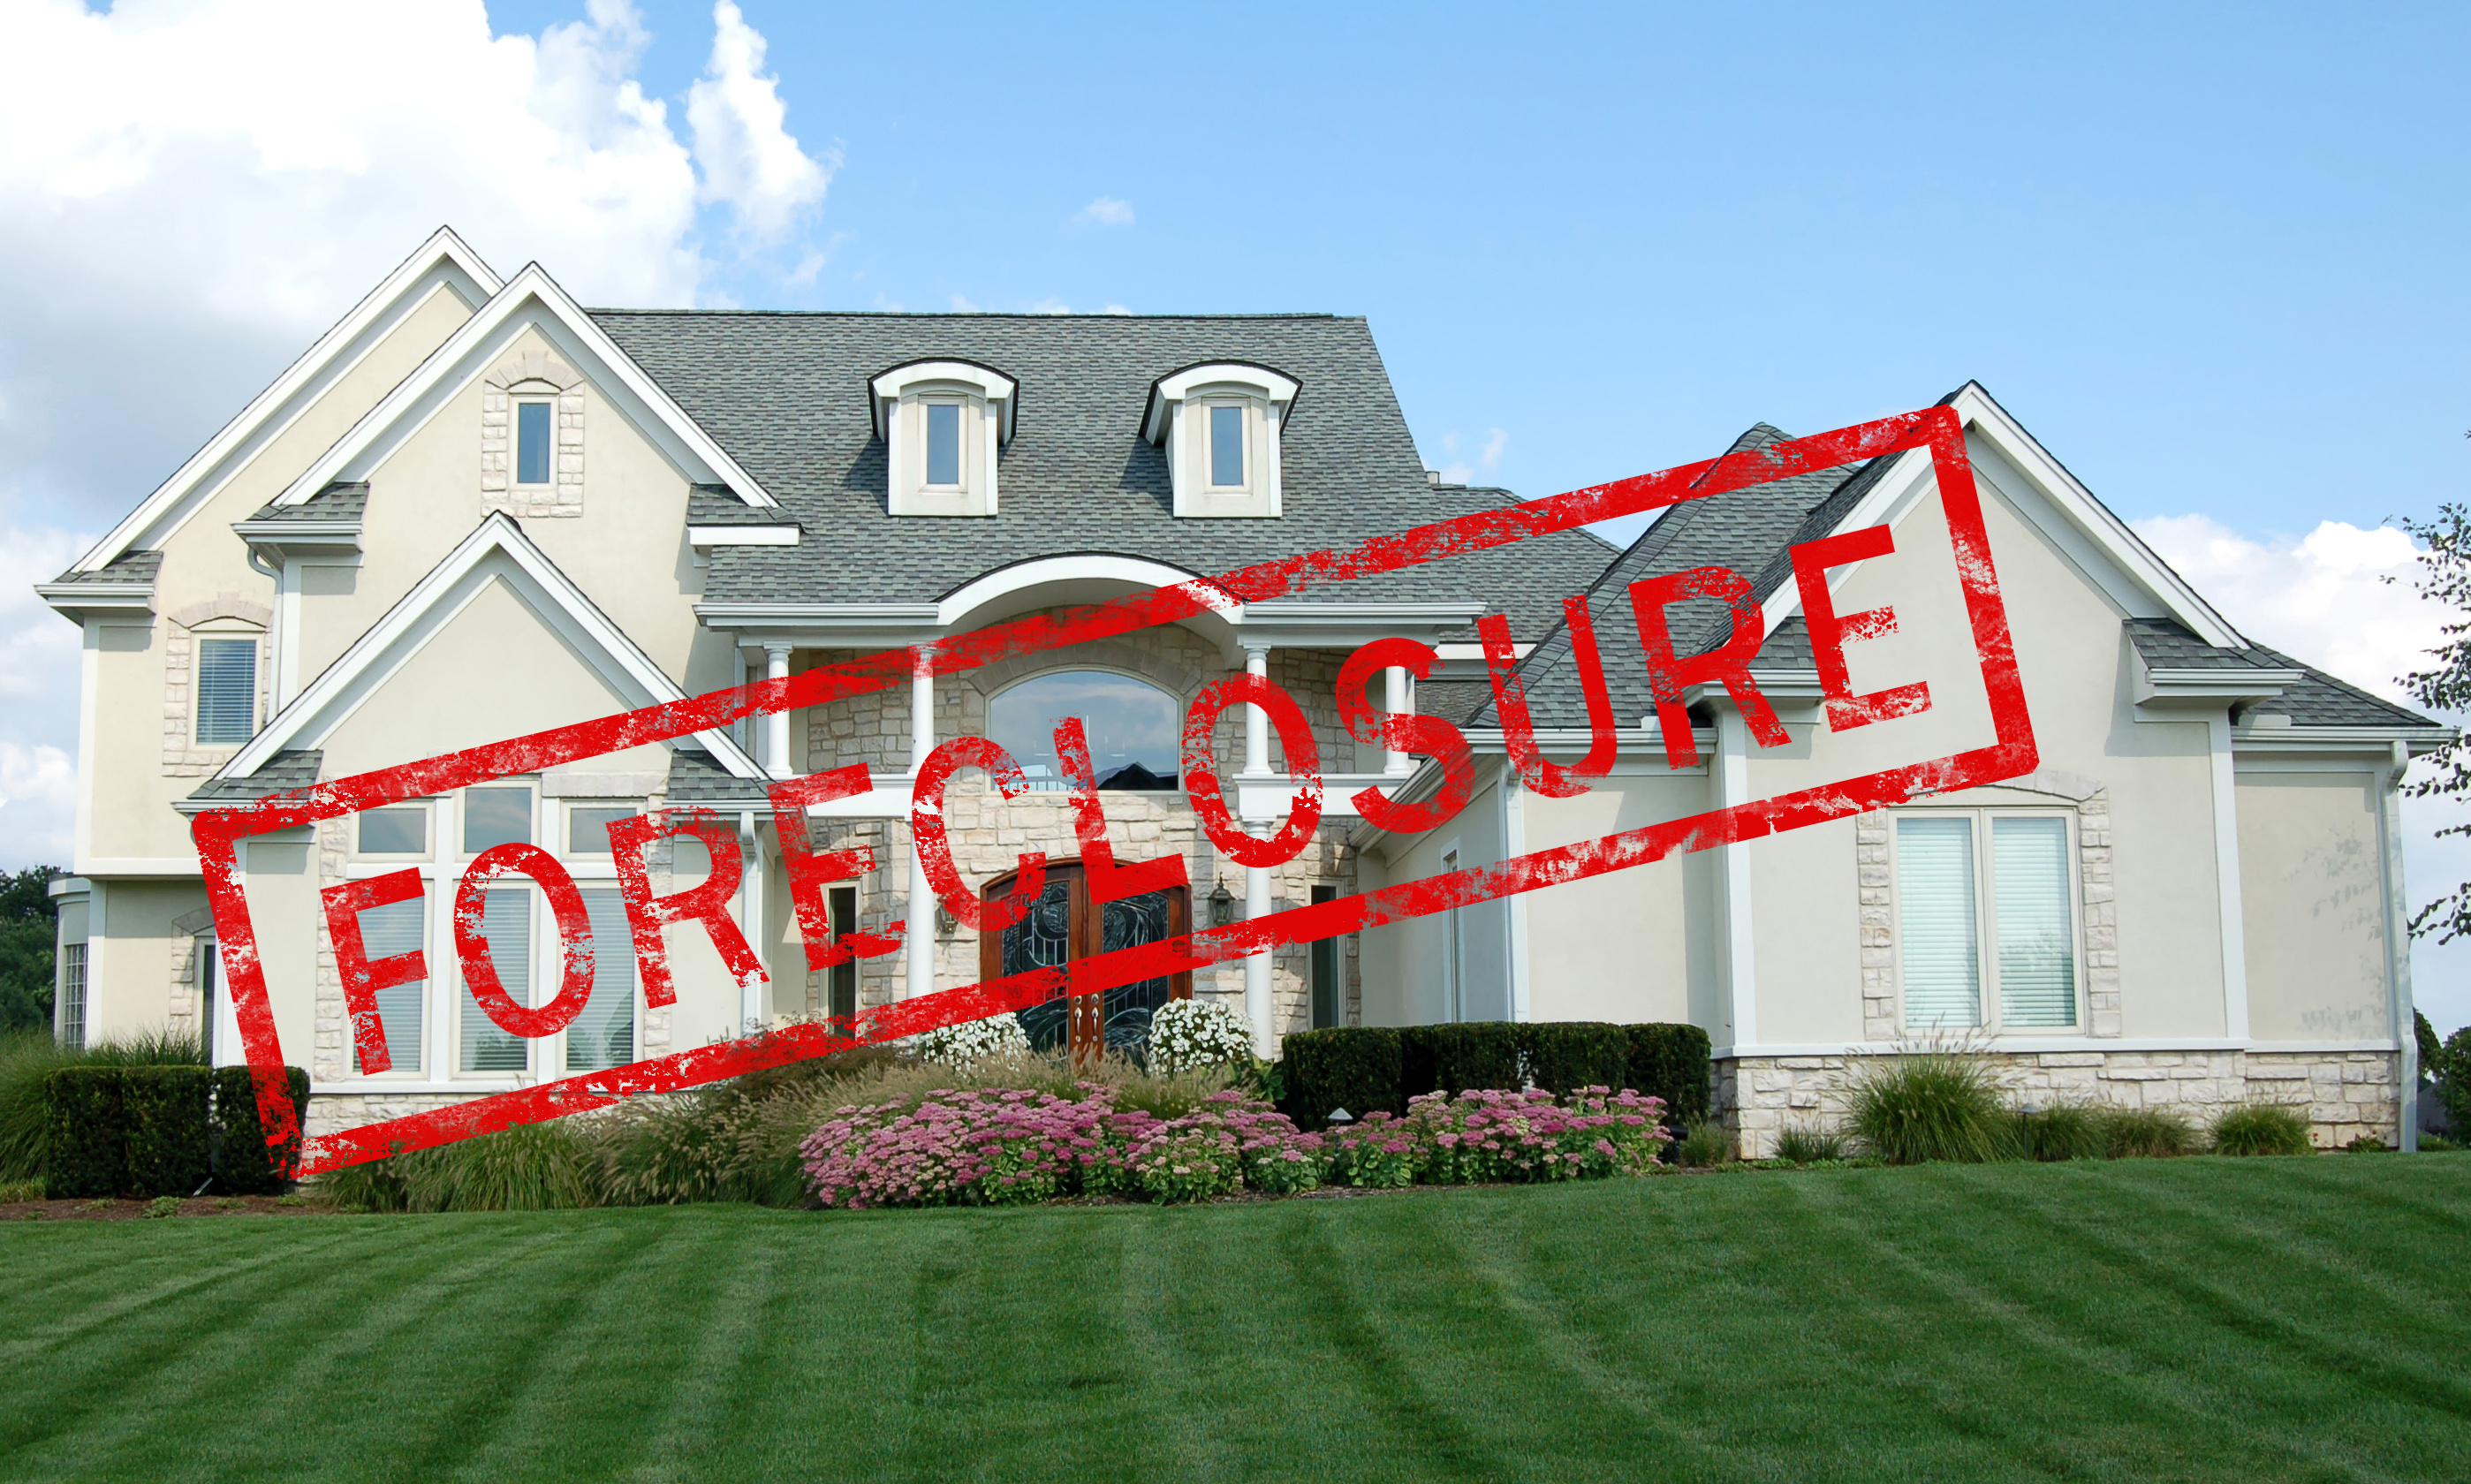 Call Astute Appraisals, Inc. to order appraisals for Howard foreclosures